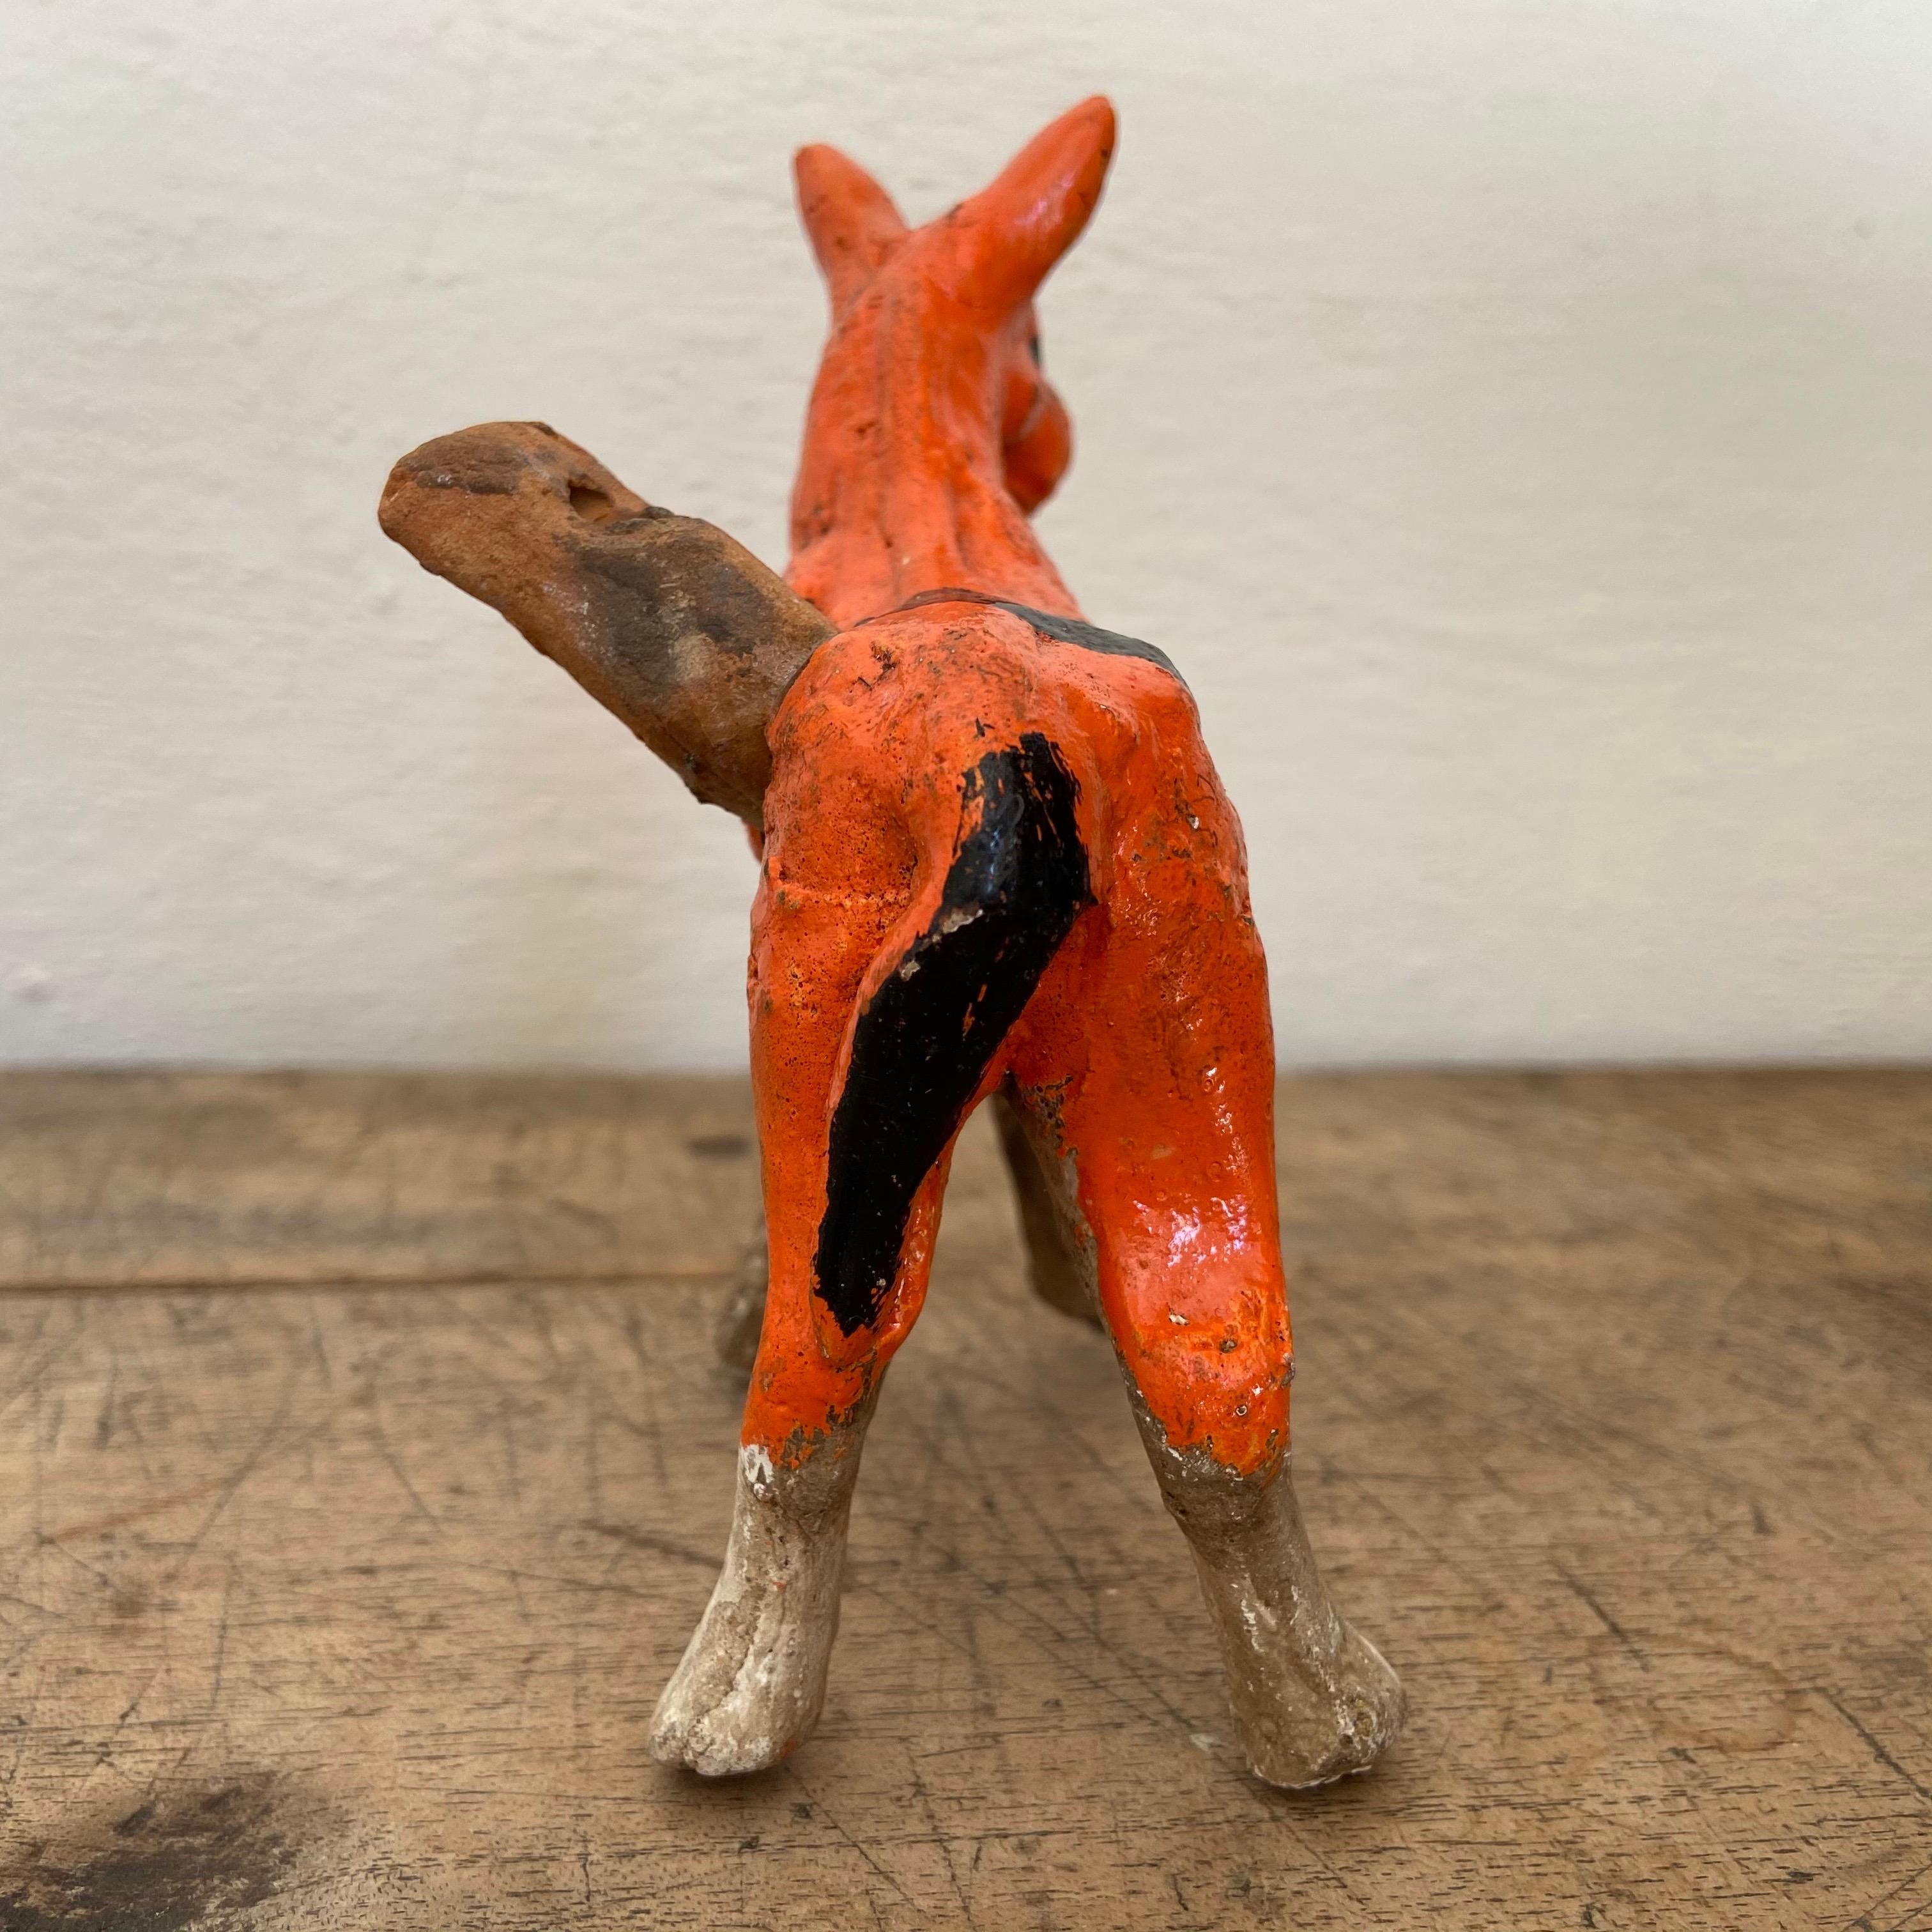 Folk Art Ceramic Horse Figure Whistle from Mexico, 1980s